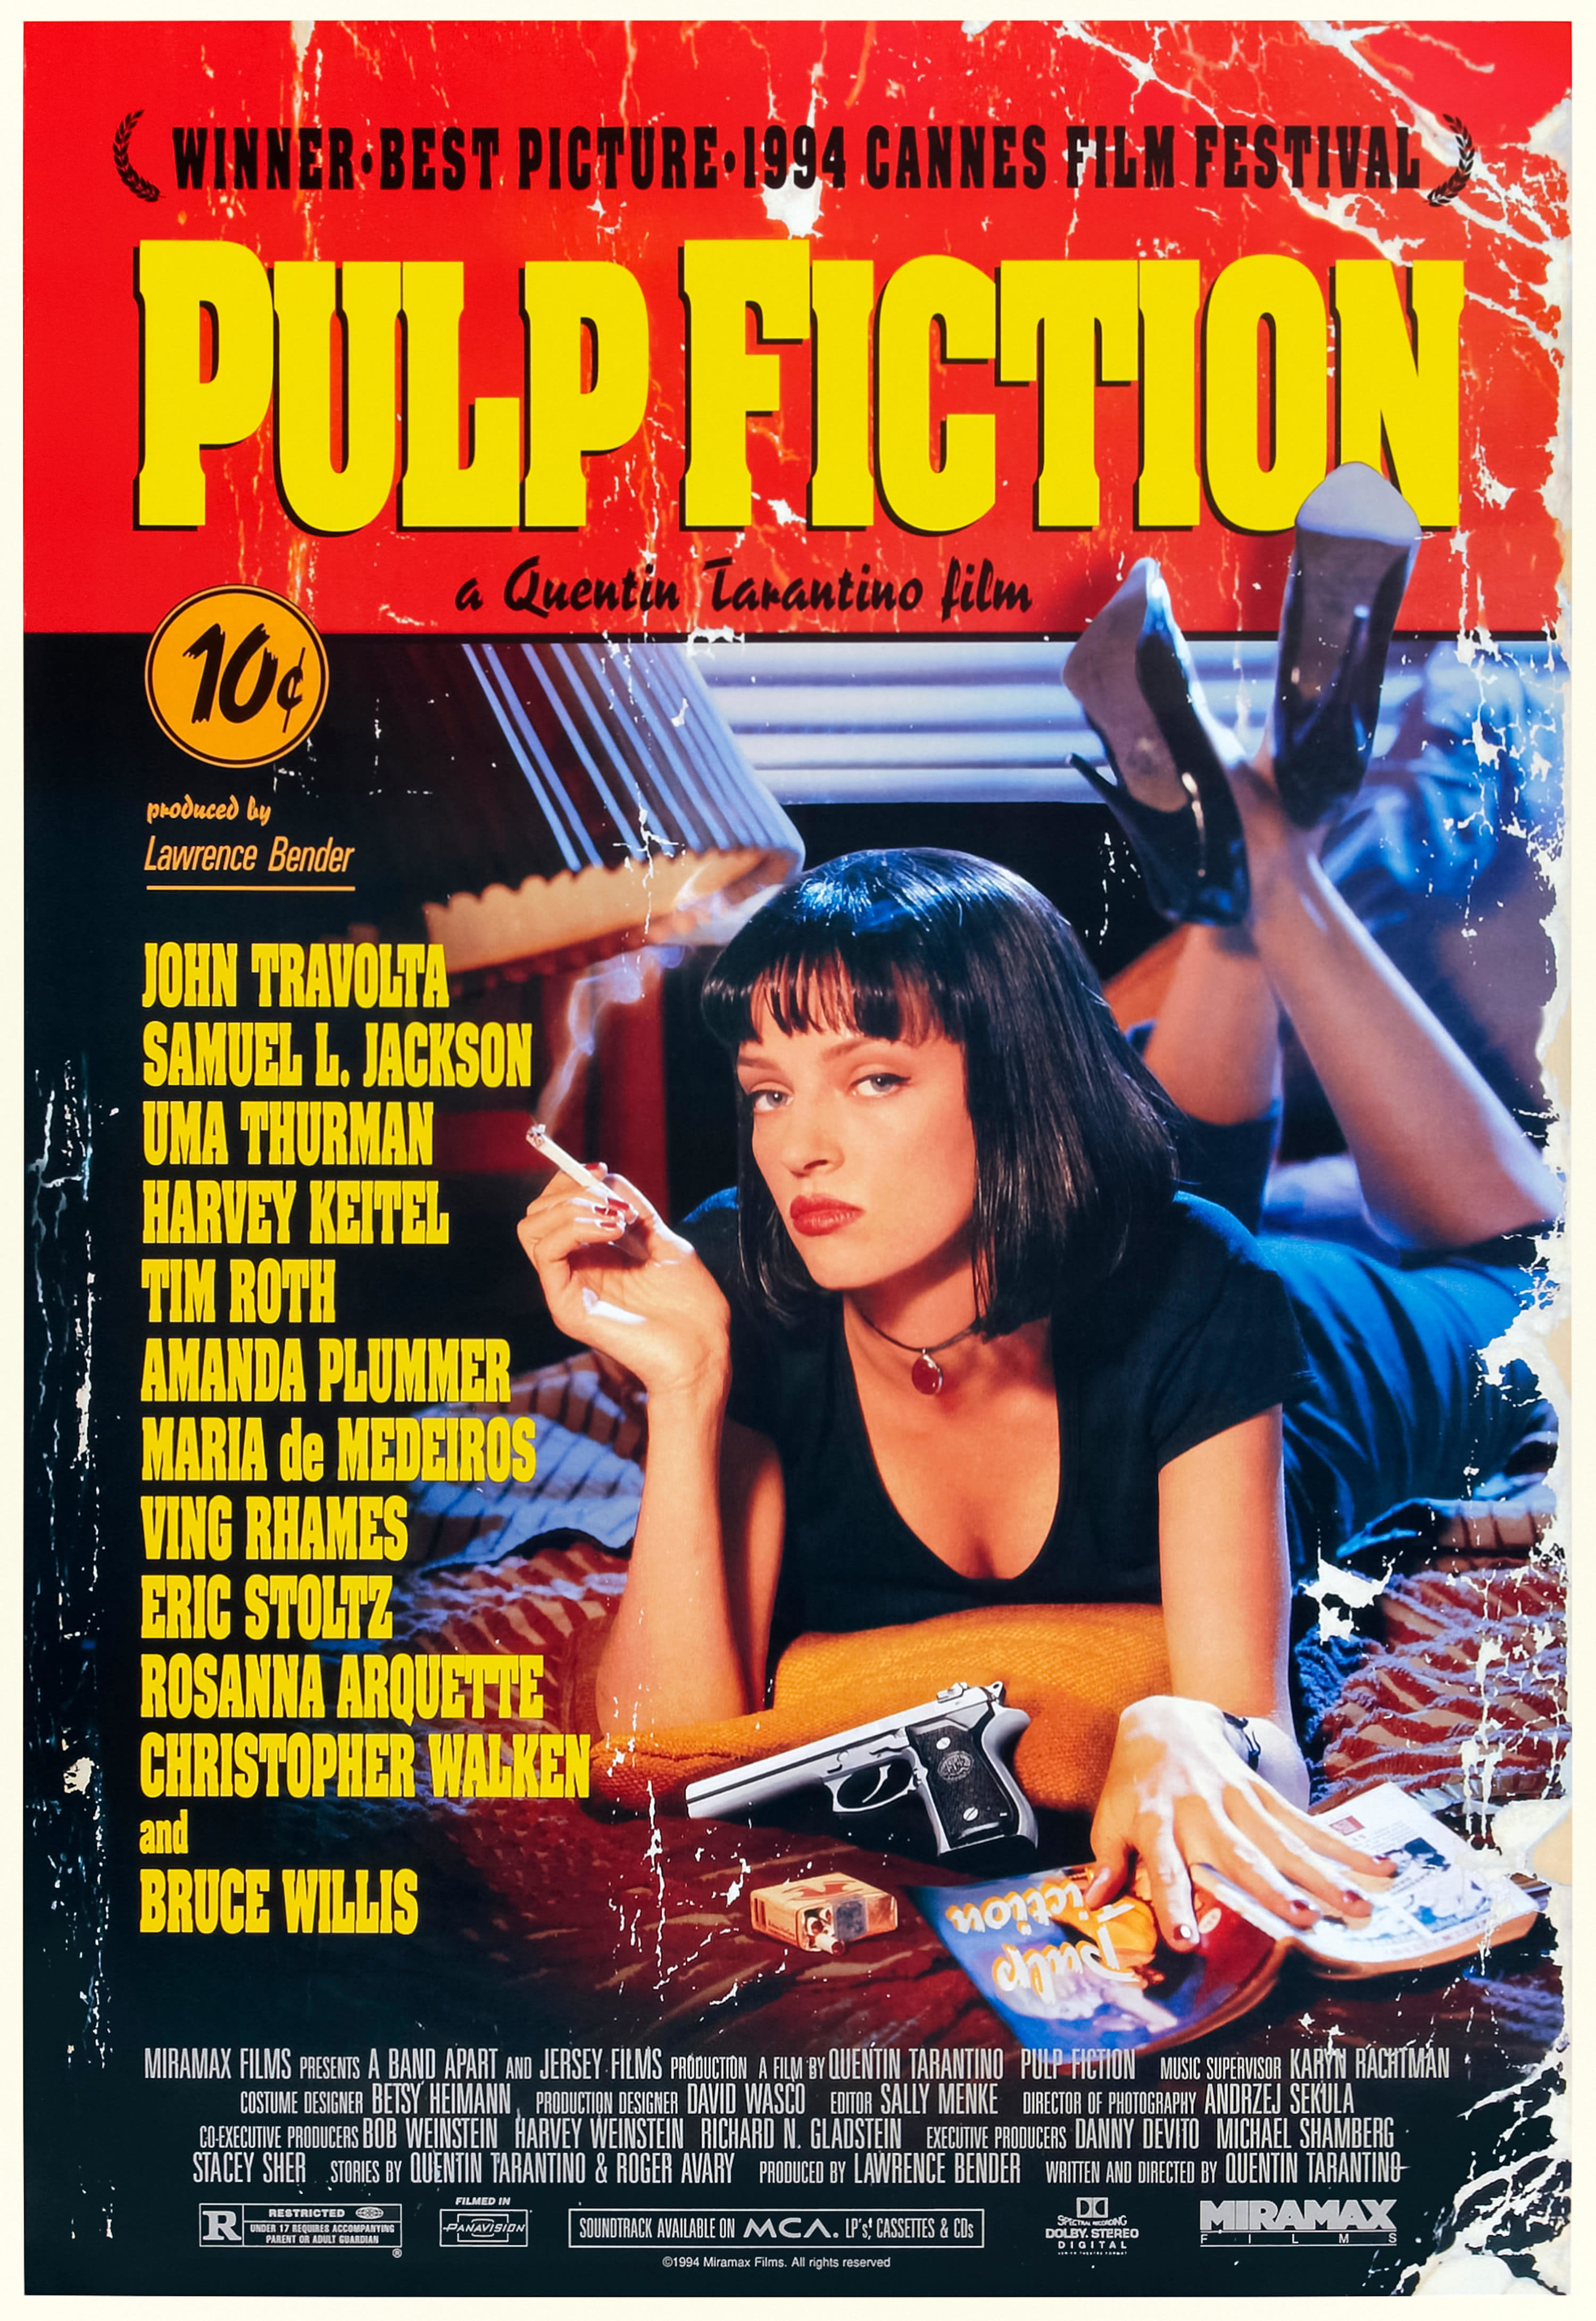 The theatrical poster of Uma Thurman in "Pulp Fiction"